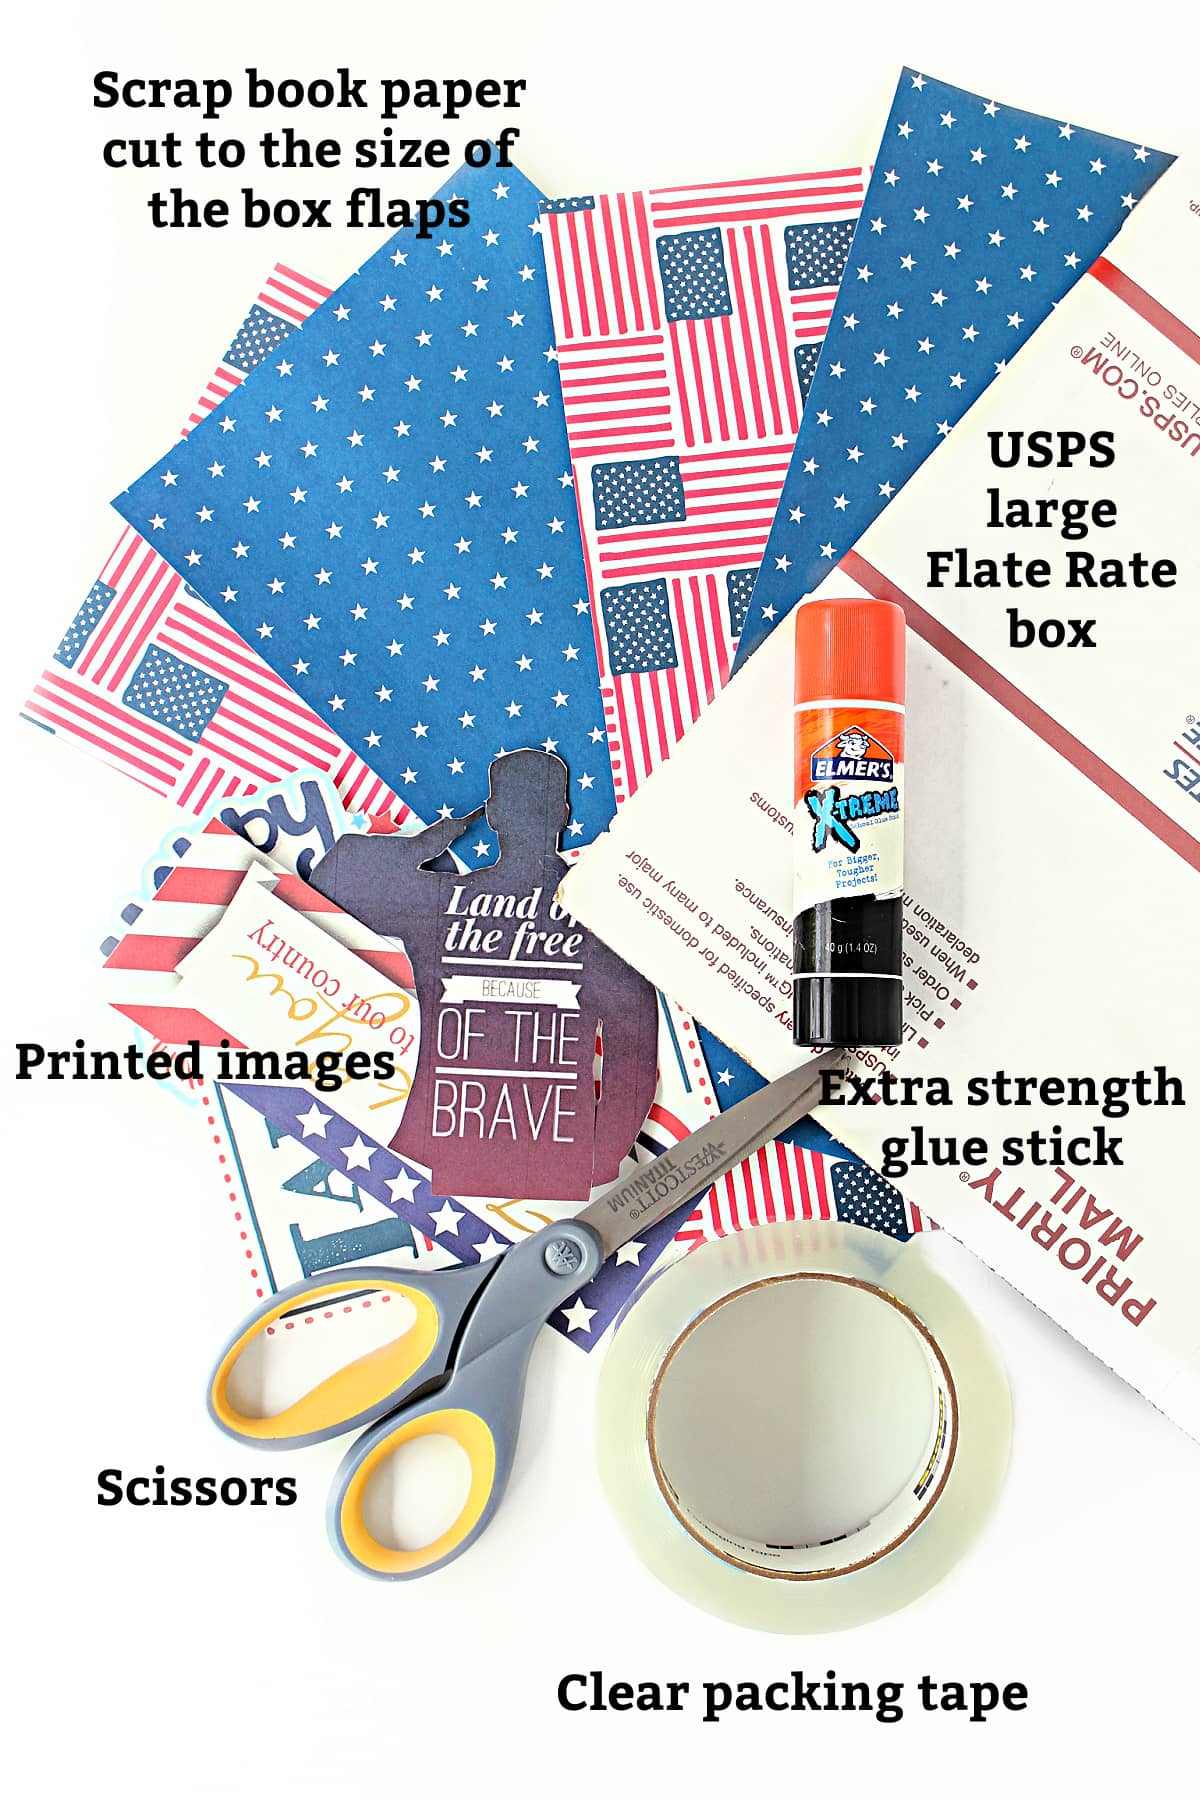 Materials labeled: scrapbook paper, box, glue stick, printed images, scissors, packing tape.